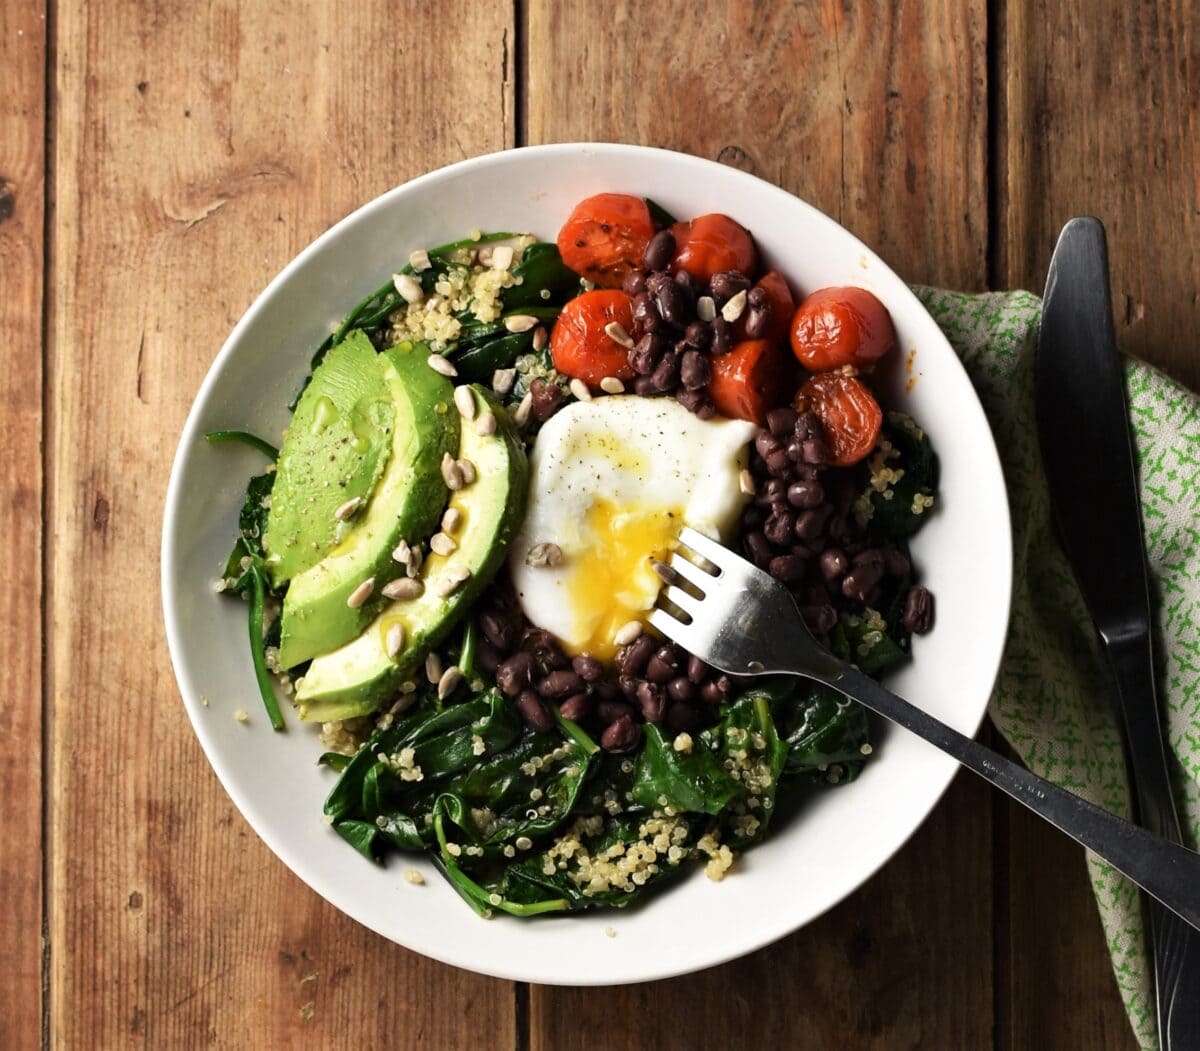 Spinach with quinoa mixture topped with sliced avocado, poached egg, beans and small tomatoes in white bowl with fork and green cloth with knife to the right.